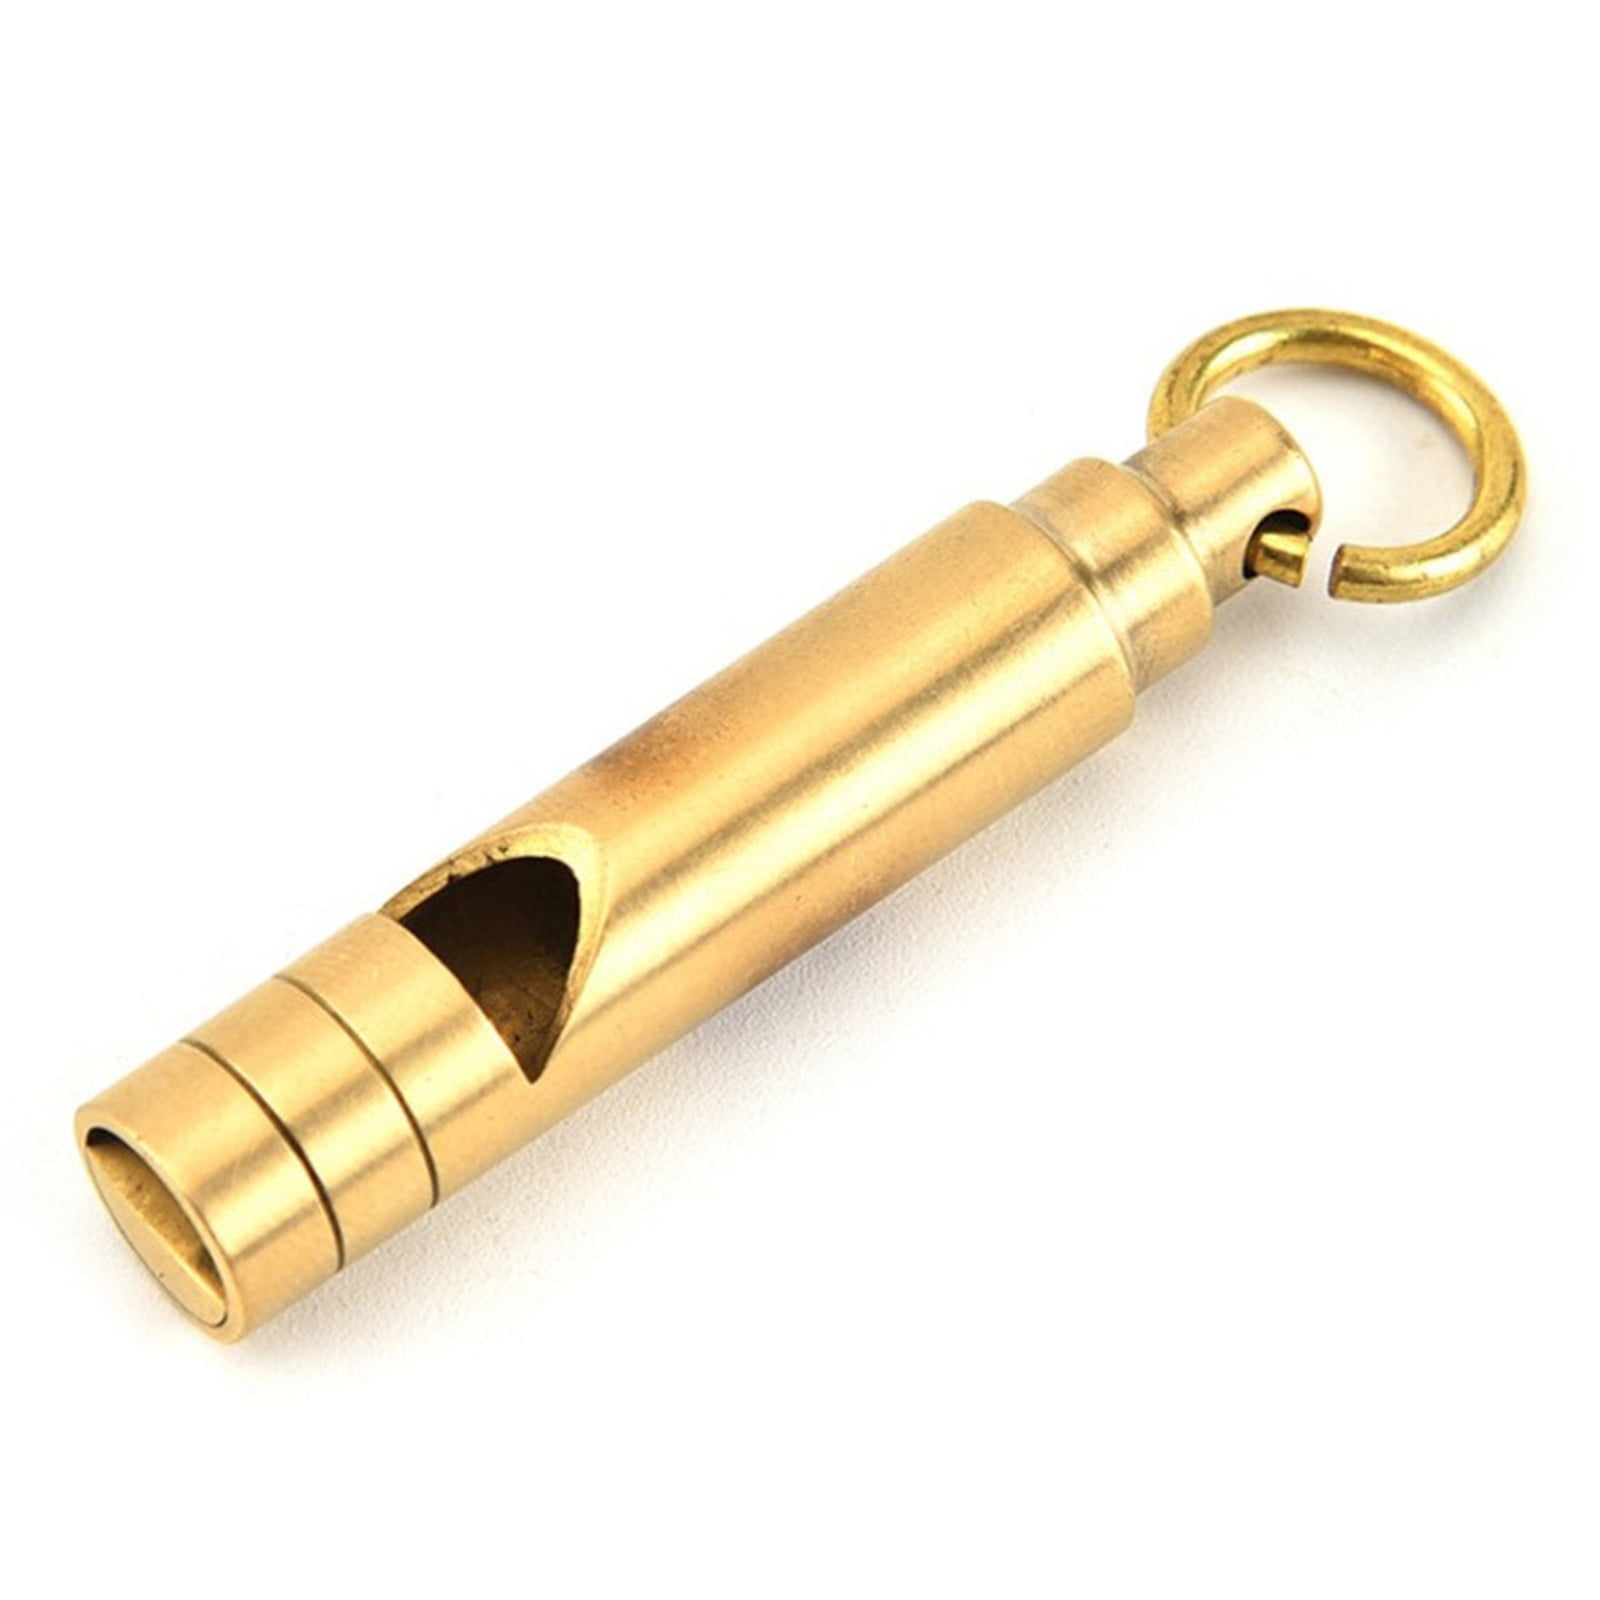 Brass Whistle Keyring Emergency Survival First Aid Camping Outdoor Essentials CB 